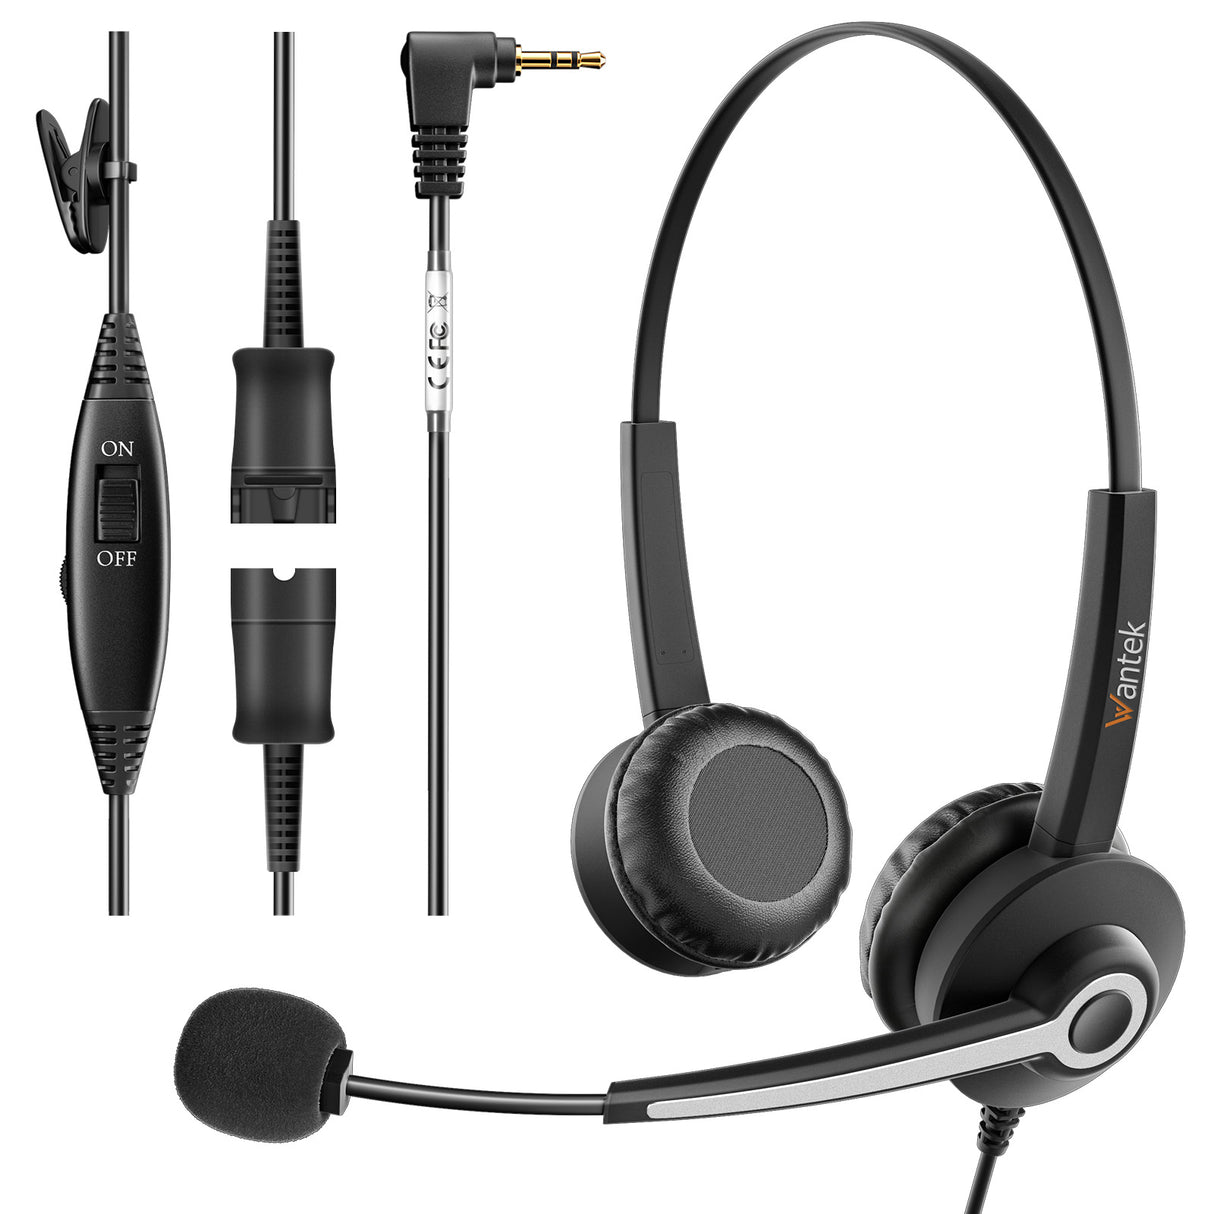 Wantek® h682 dual 2.5mm headset with QD for mobile